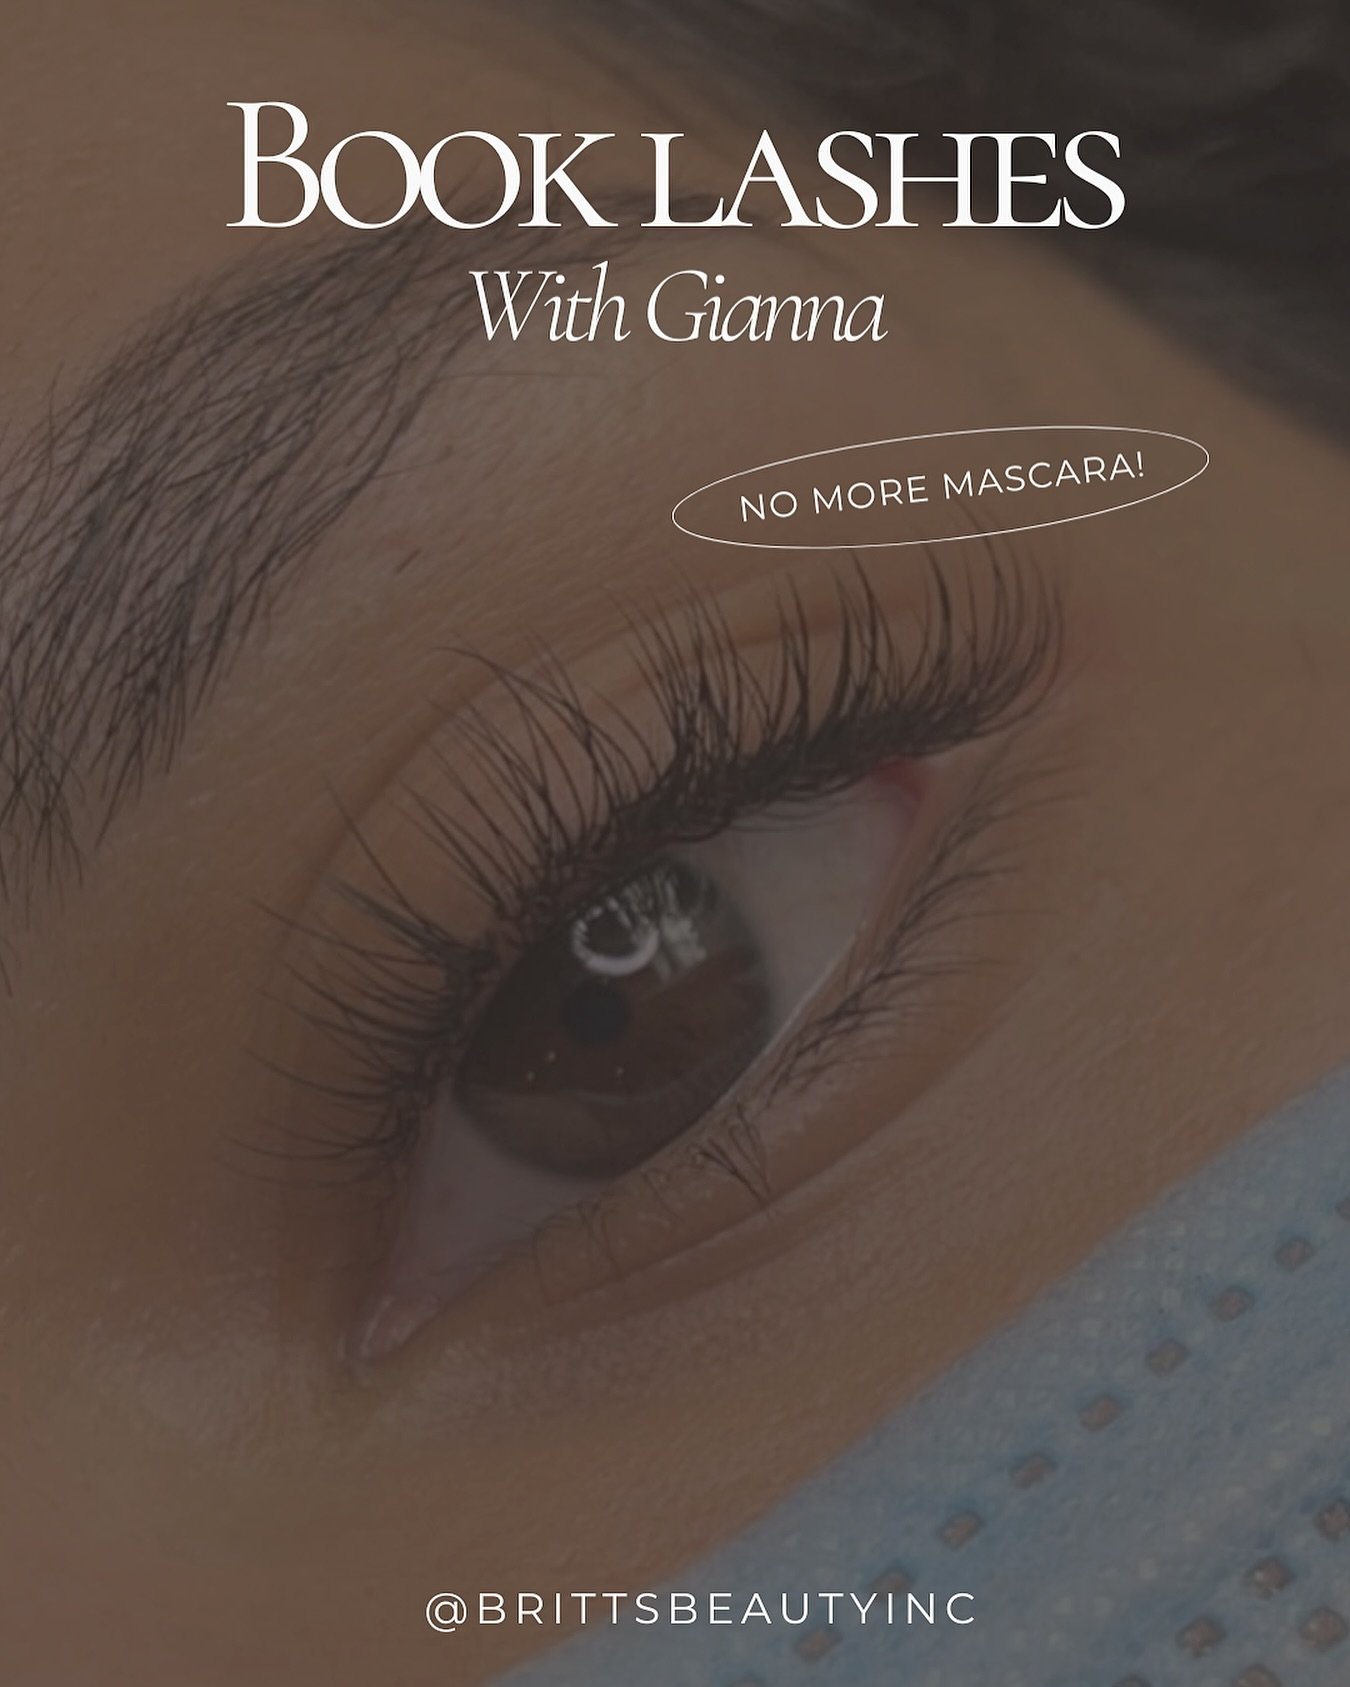 🌟 Transform your look with our luxurious lash extensions! 🌟

At B&rsquo;s Beauty, we specialize in creating stunning, natural-looking lash extensions that enhance your eyes and boost your confidence.  Say goodbye to your mascara this summer! Book a